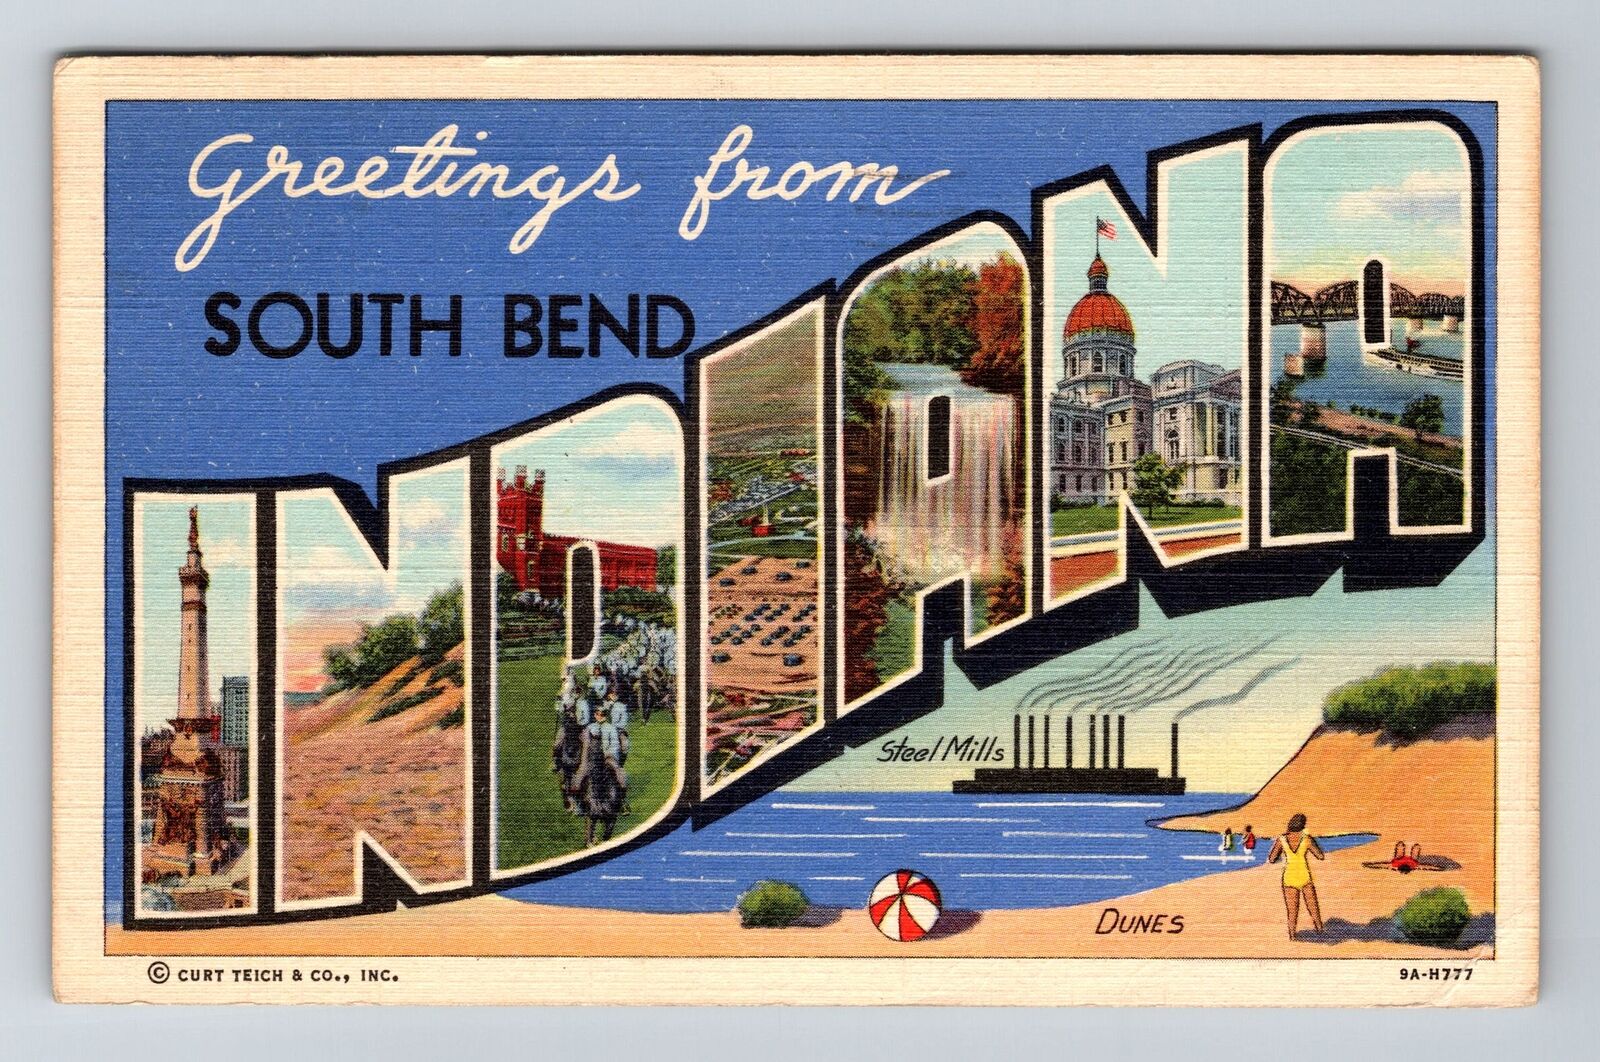 South Bend IN-Indiana, LARGE LETTER Greetings, c1944 Vintage Souvenir Postcard